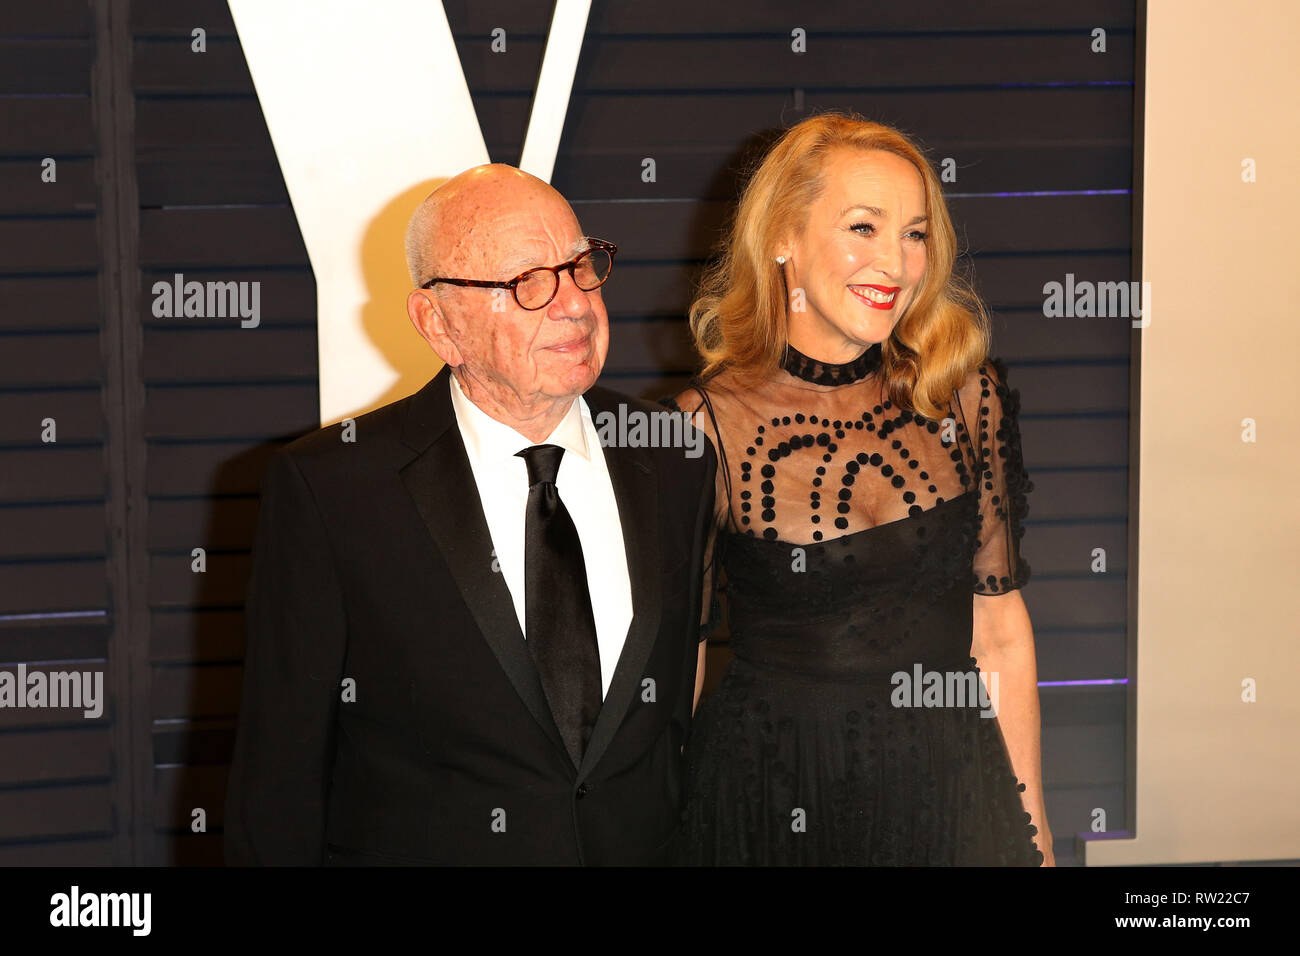 Beverly Hills, CA, USA. 24th Feb, 2019. LOS ANGELES - FEB 24: Rupert Murdoch, Jerry Hall at the 2019 Vanity Fair Oscar Party on the Wallis Annenberg Center for the Performing Arts on February 24, 2019 in Beverly Hills, CA Credit: Kay Blake/ZUMA Wire/Alamy Live News Stock Photo